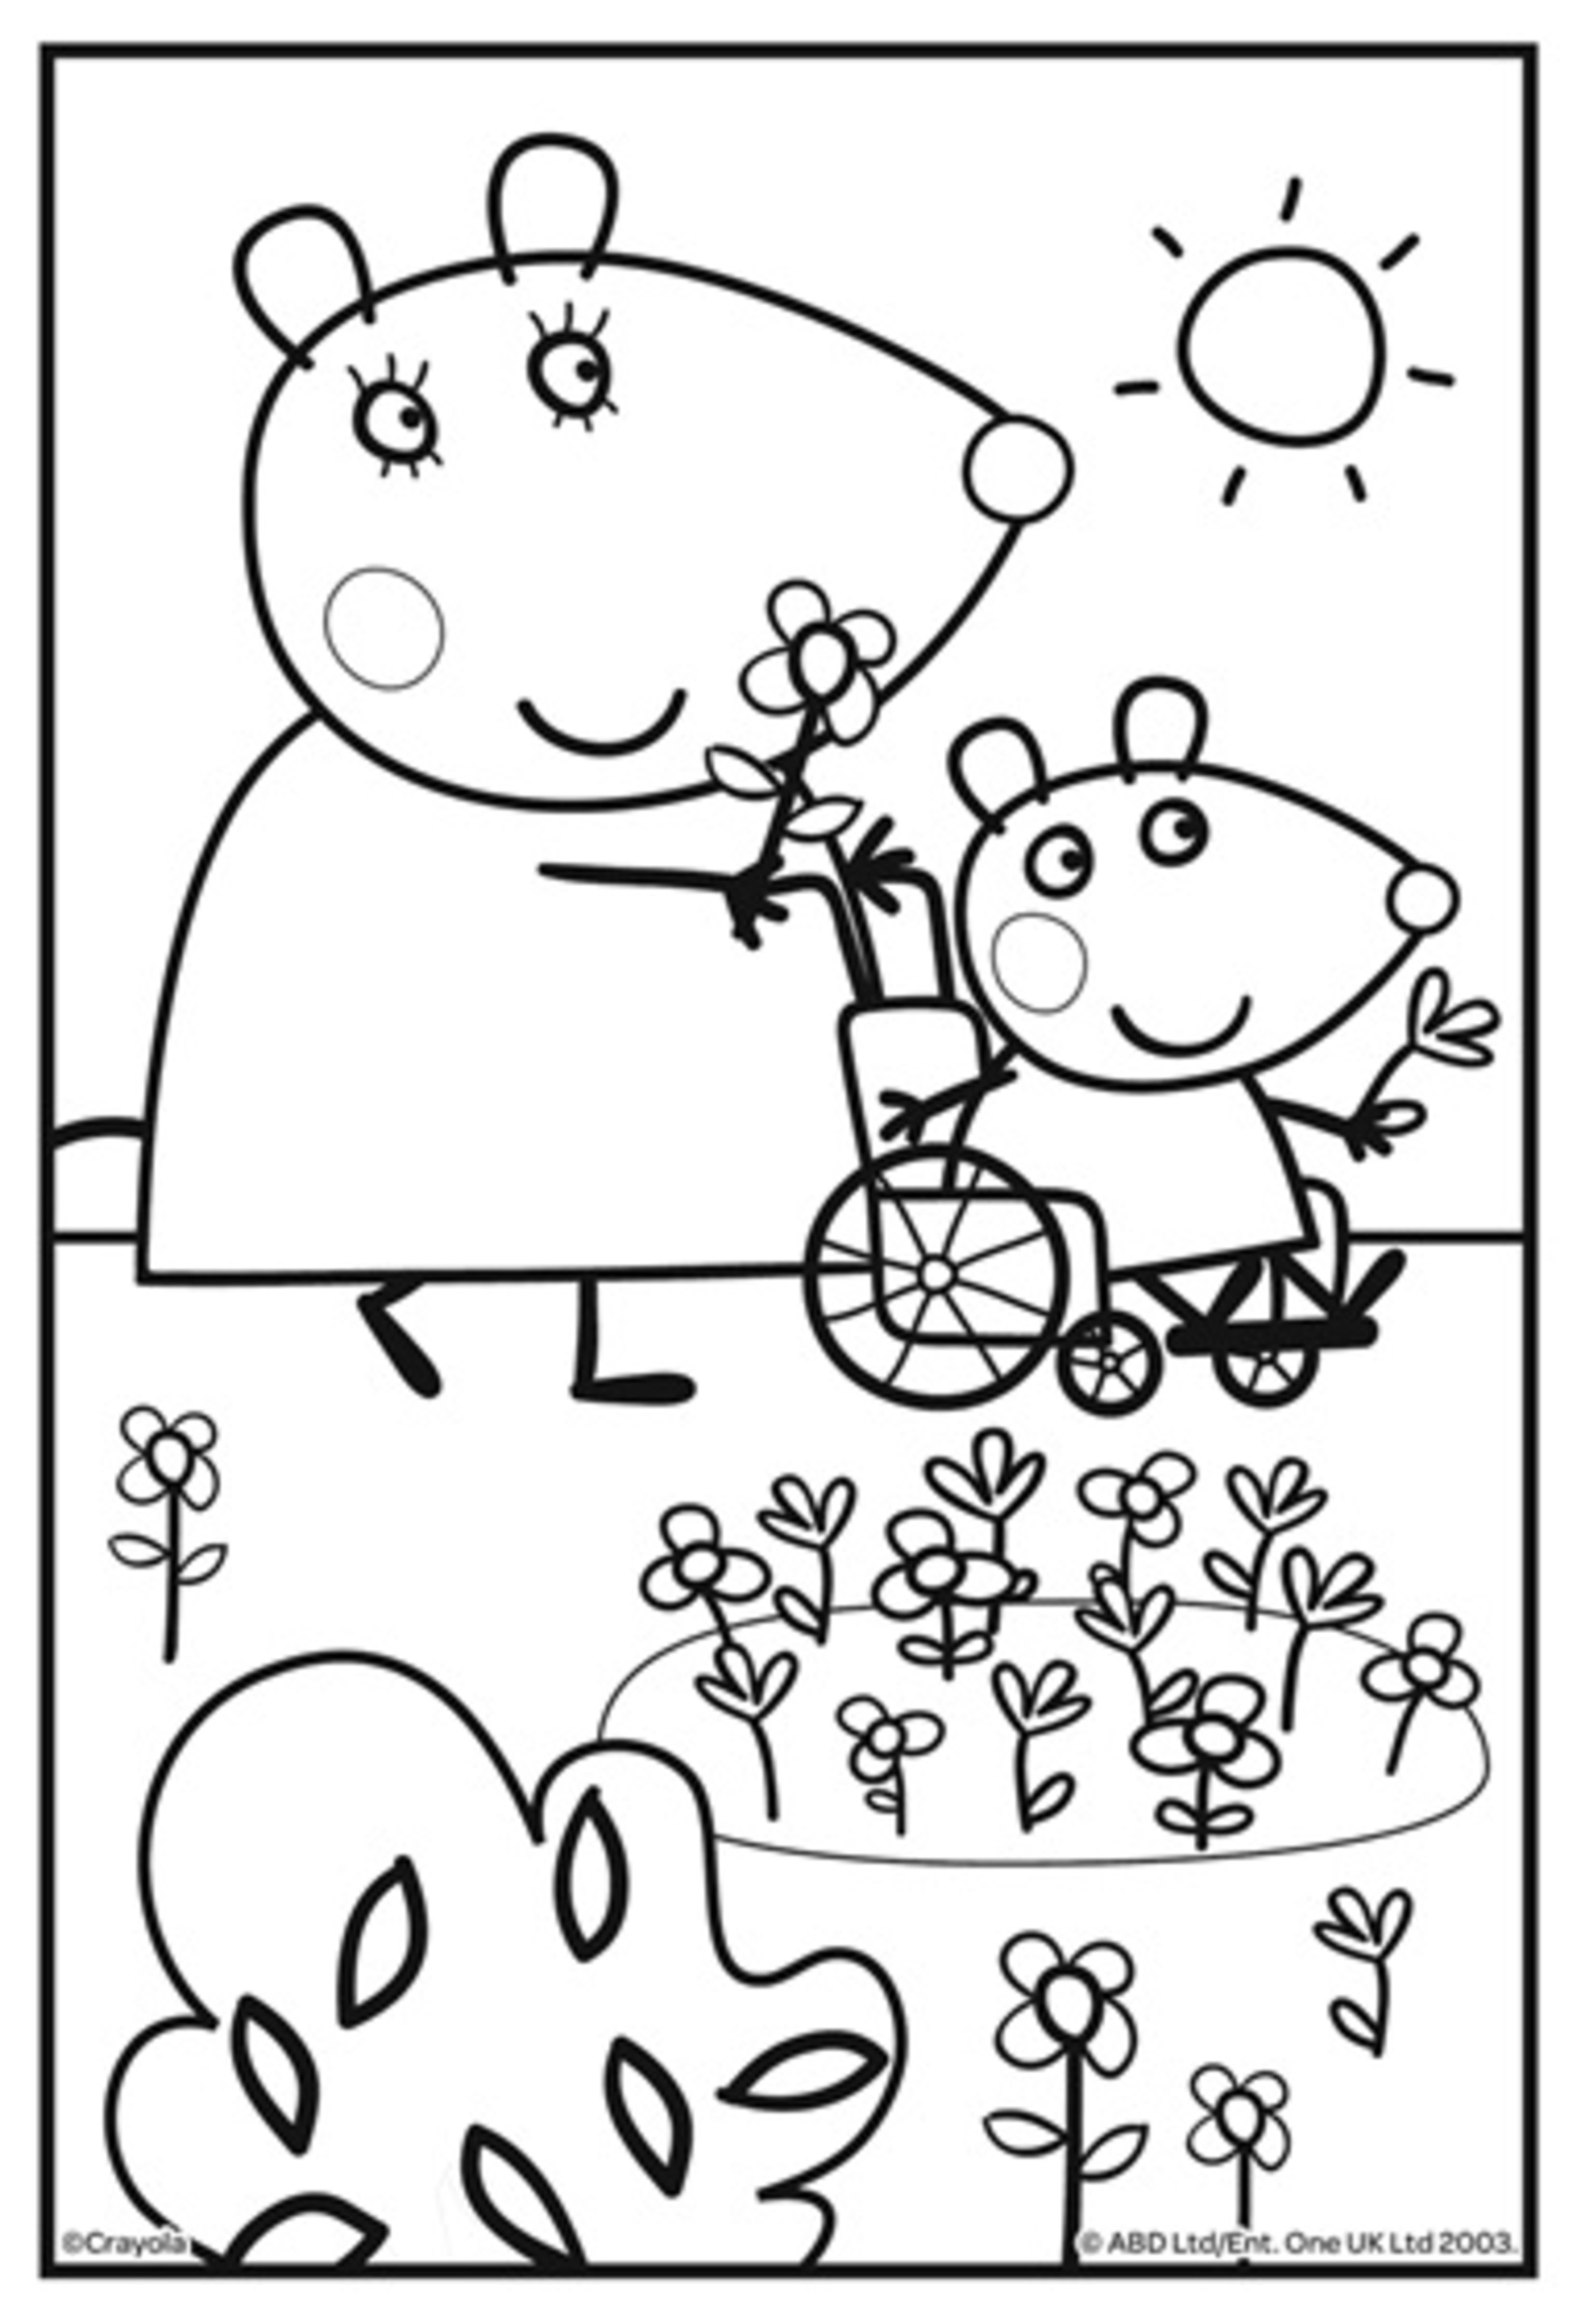 Peppa pig has hurt himself! His dad pushes him in a wheelchair